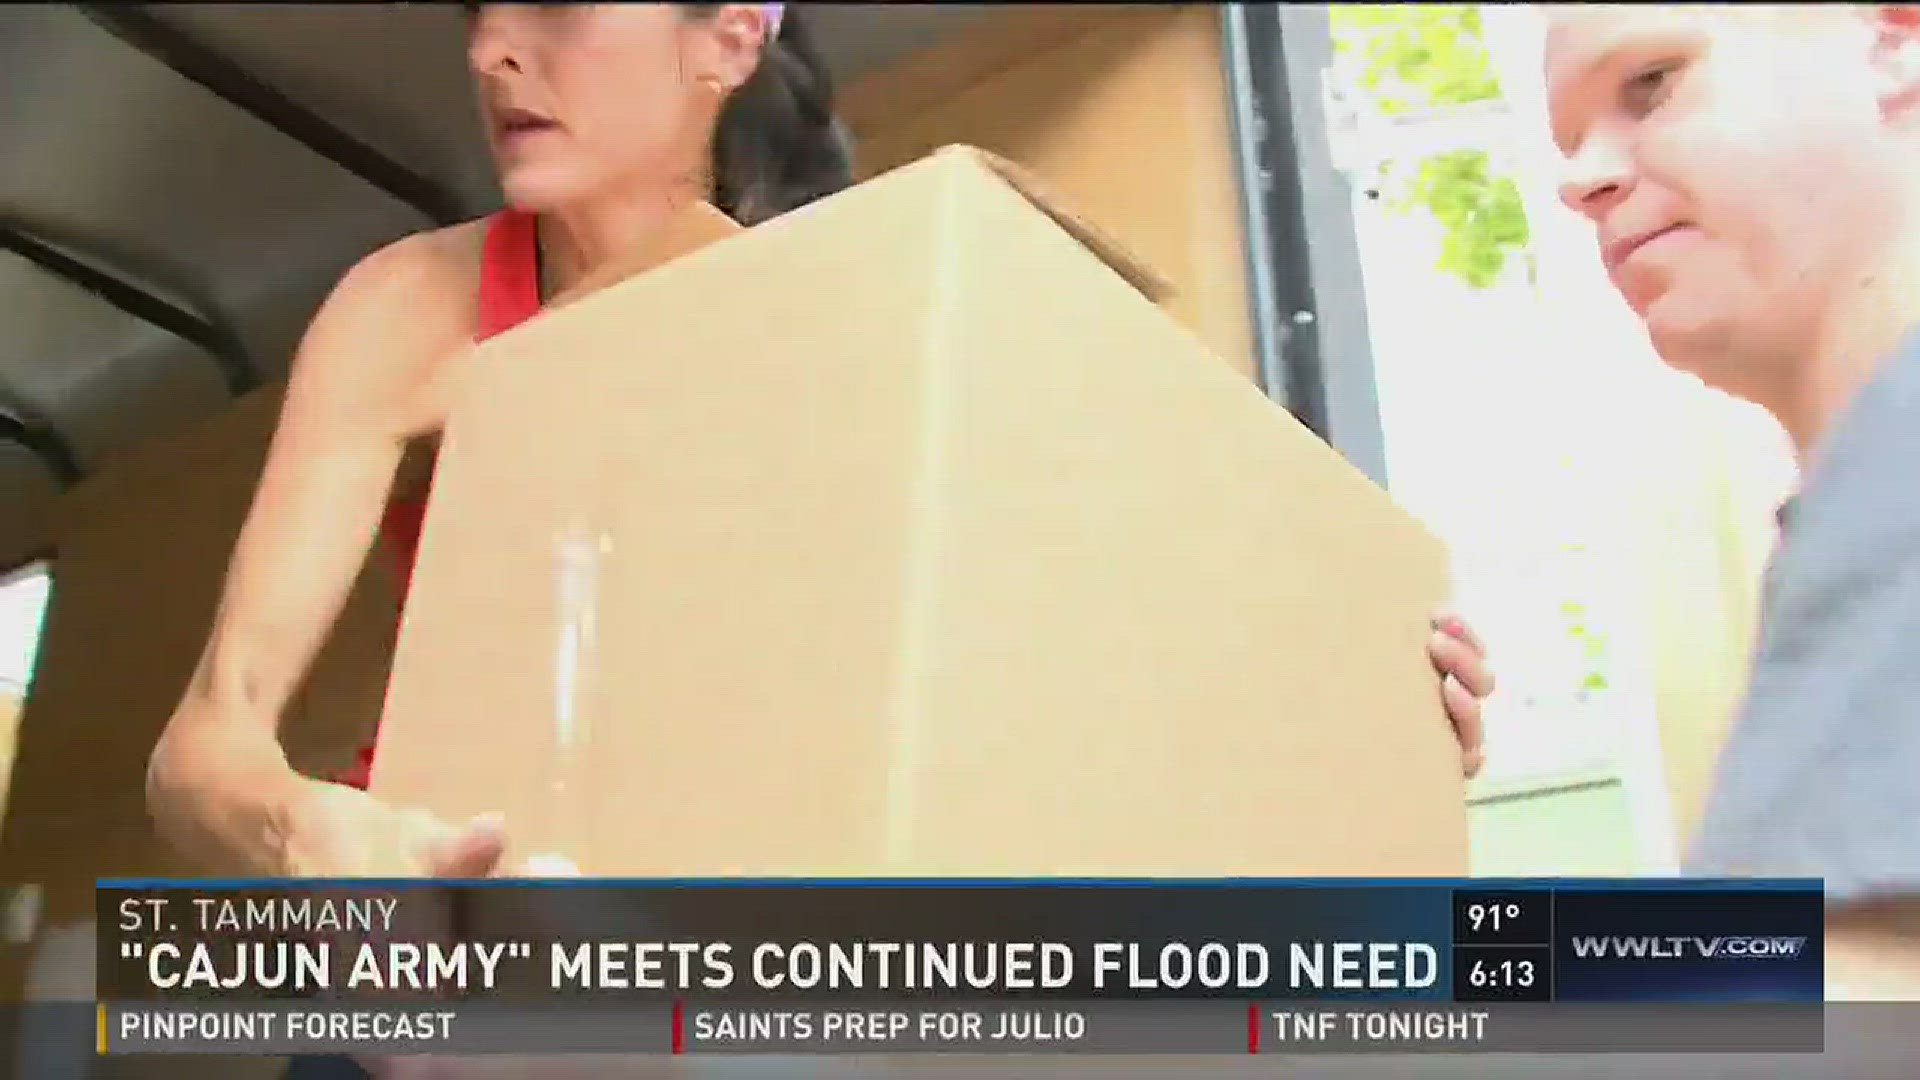 Ashley Rodrigue talks to those in the 'Cajun Army', who are helping people with supplies after historic flooding.